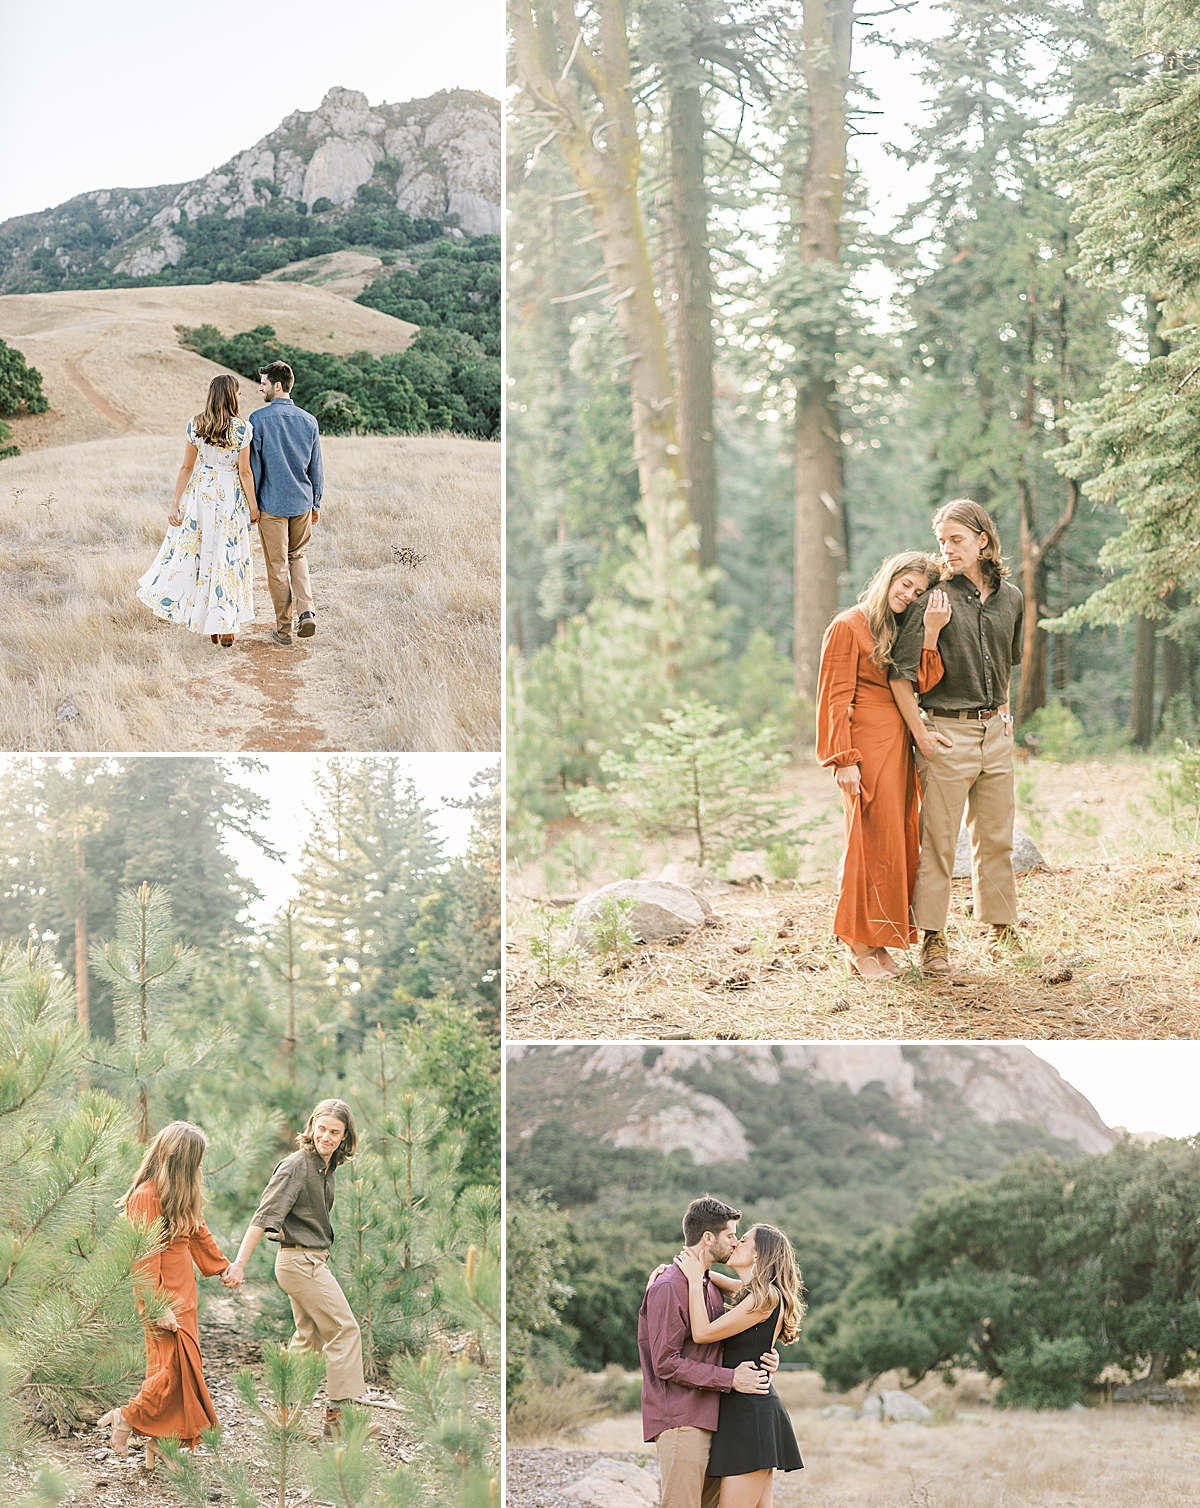 Lake Arrowhead and Bishop's Peak are some of our favorite mountainous areas for engagement photos in Southern California 